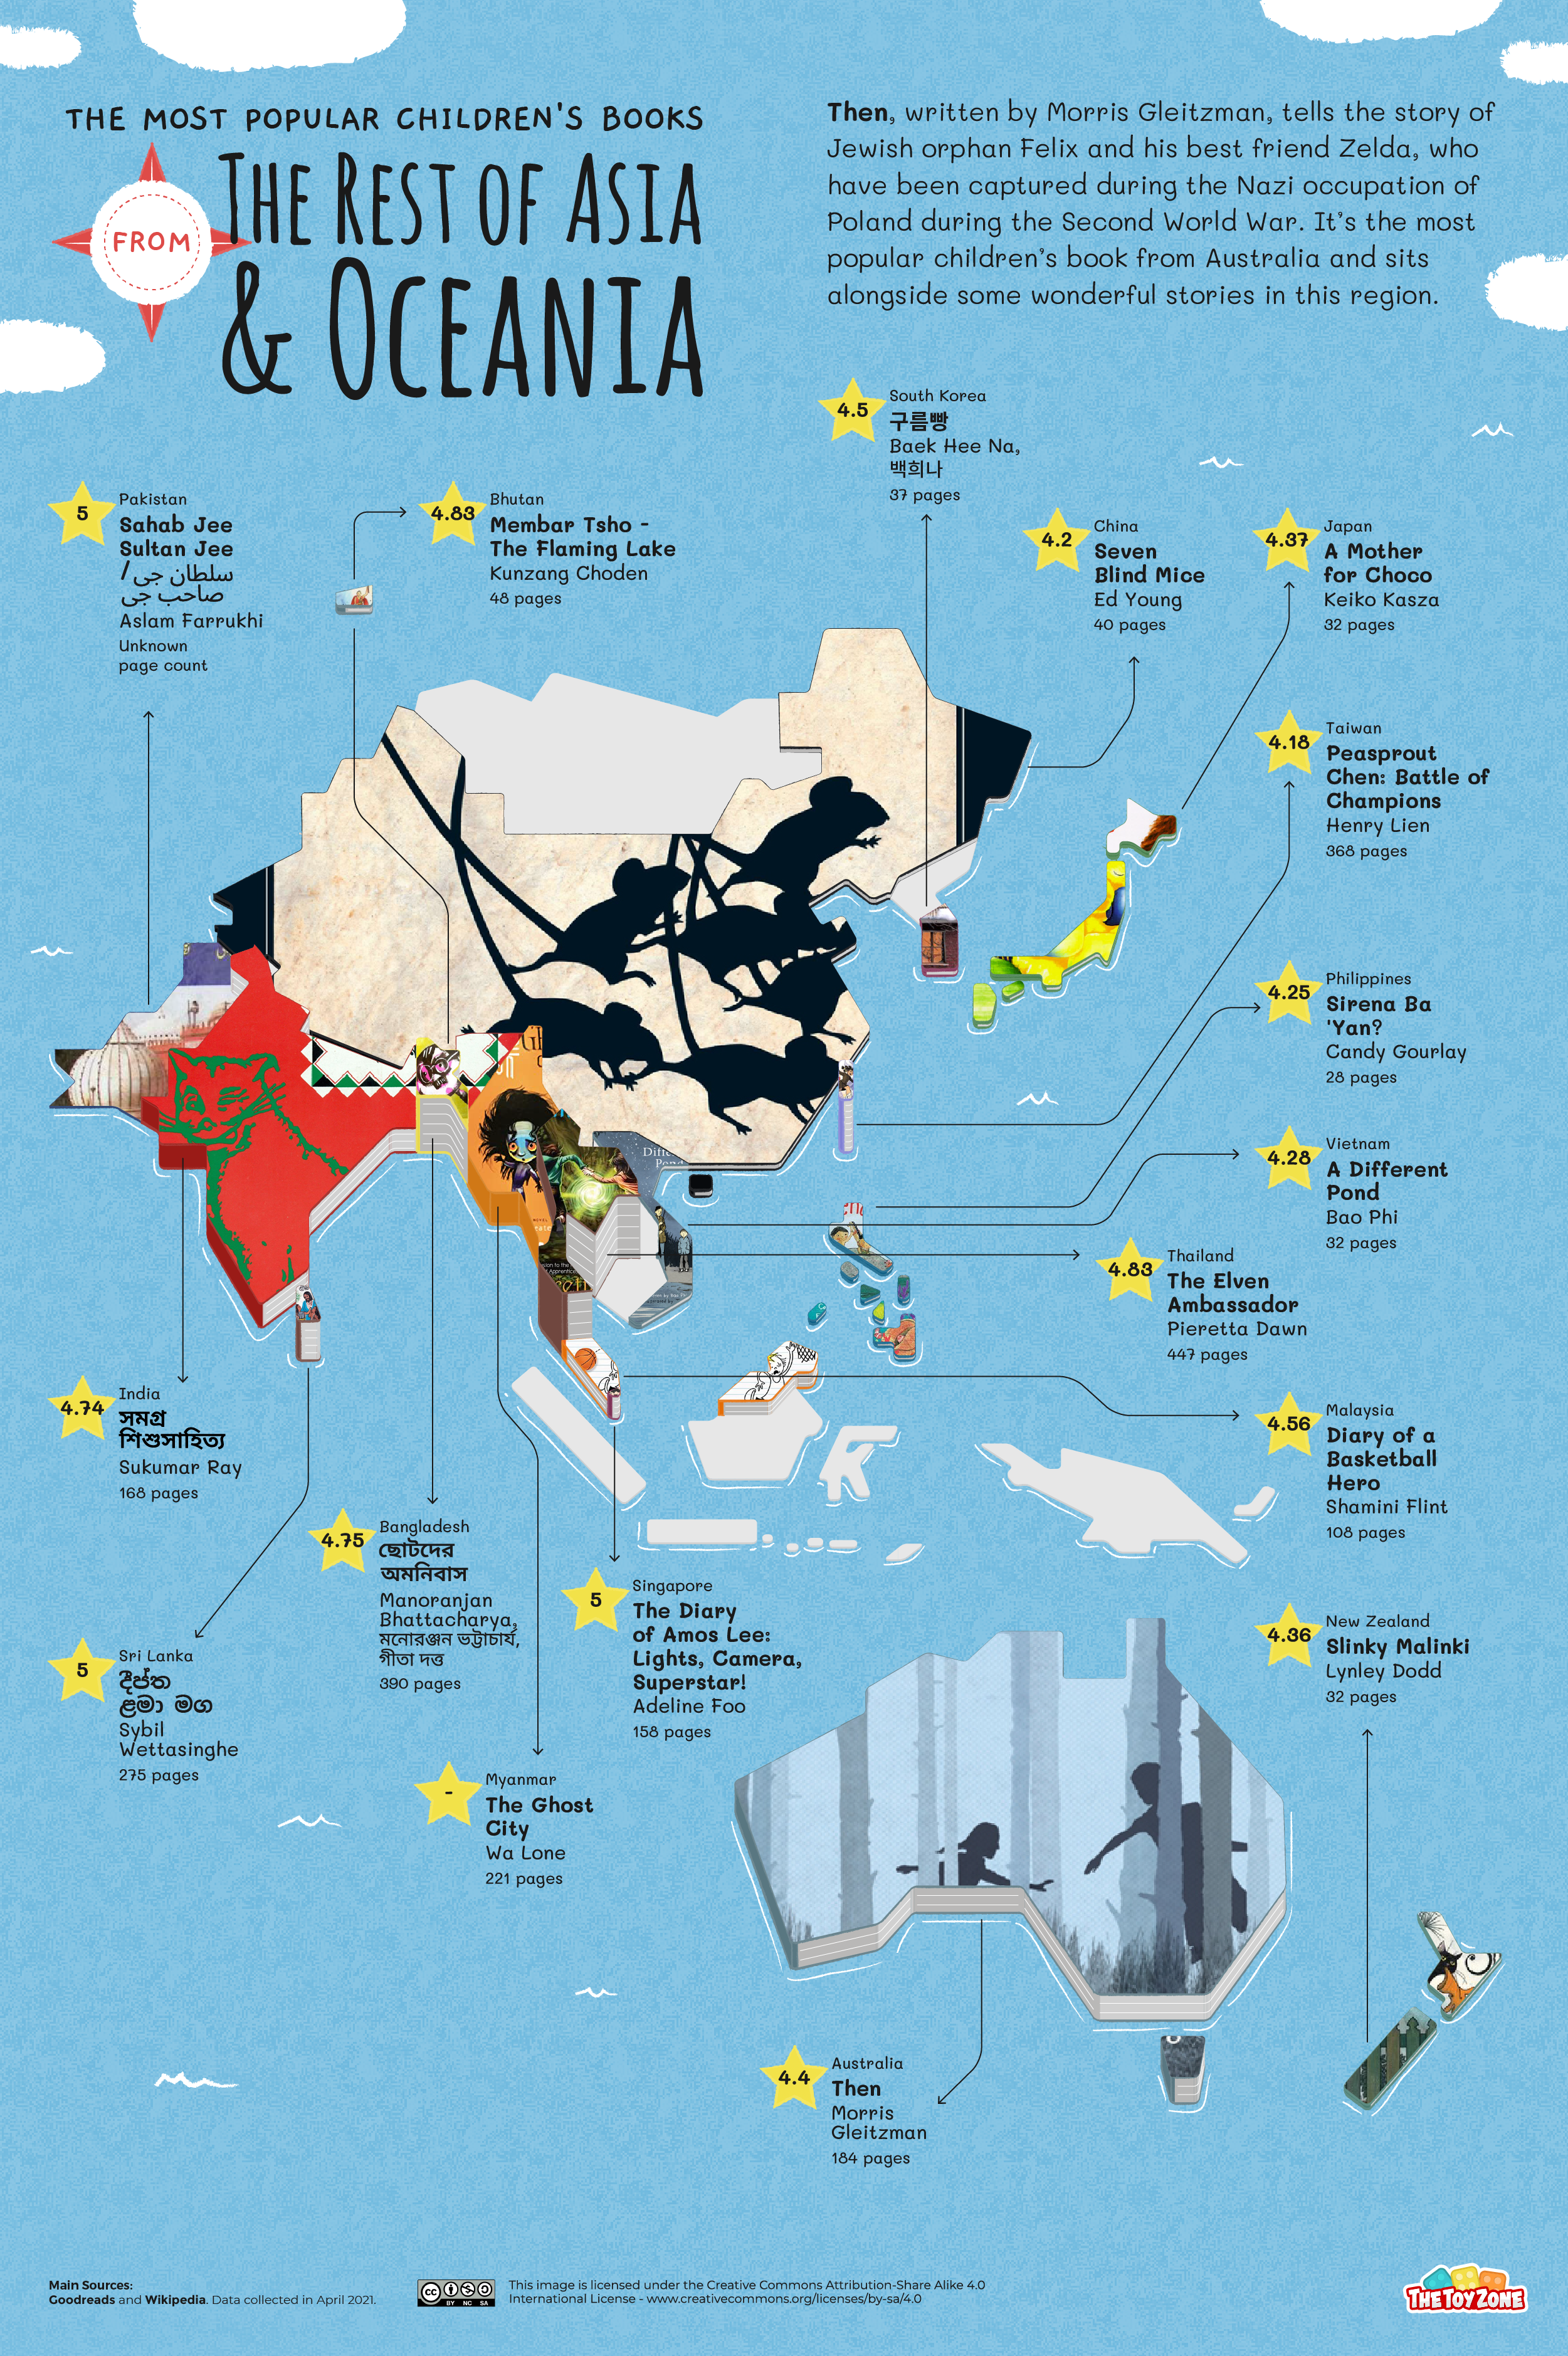 Most popular children's books in Asian and Oceania map